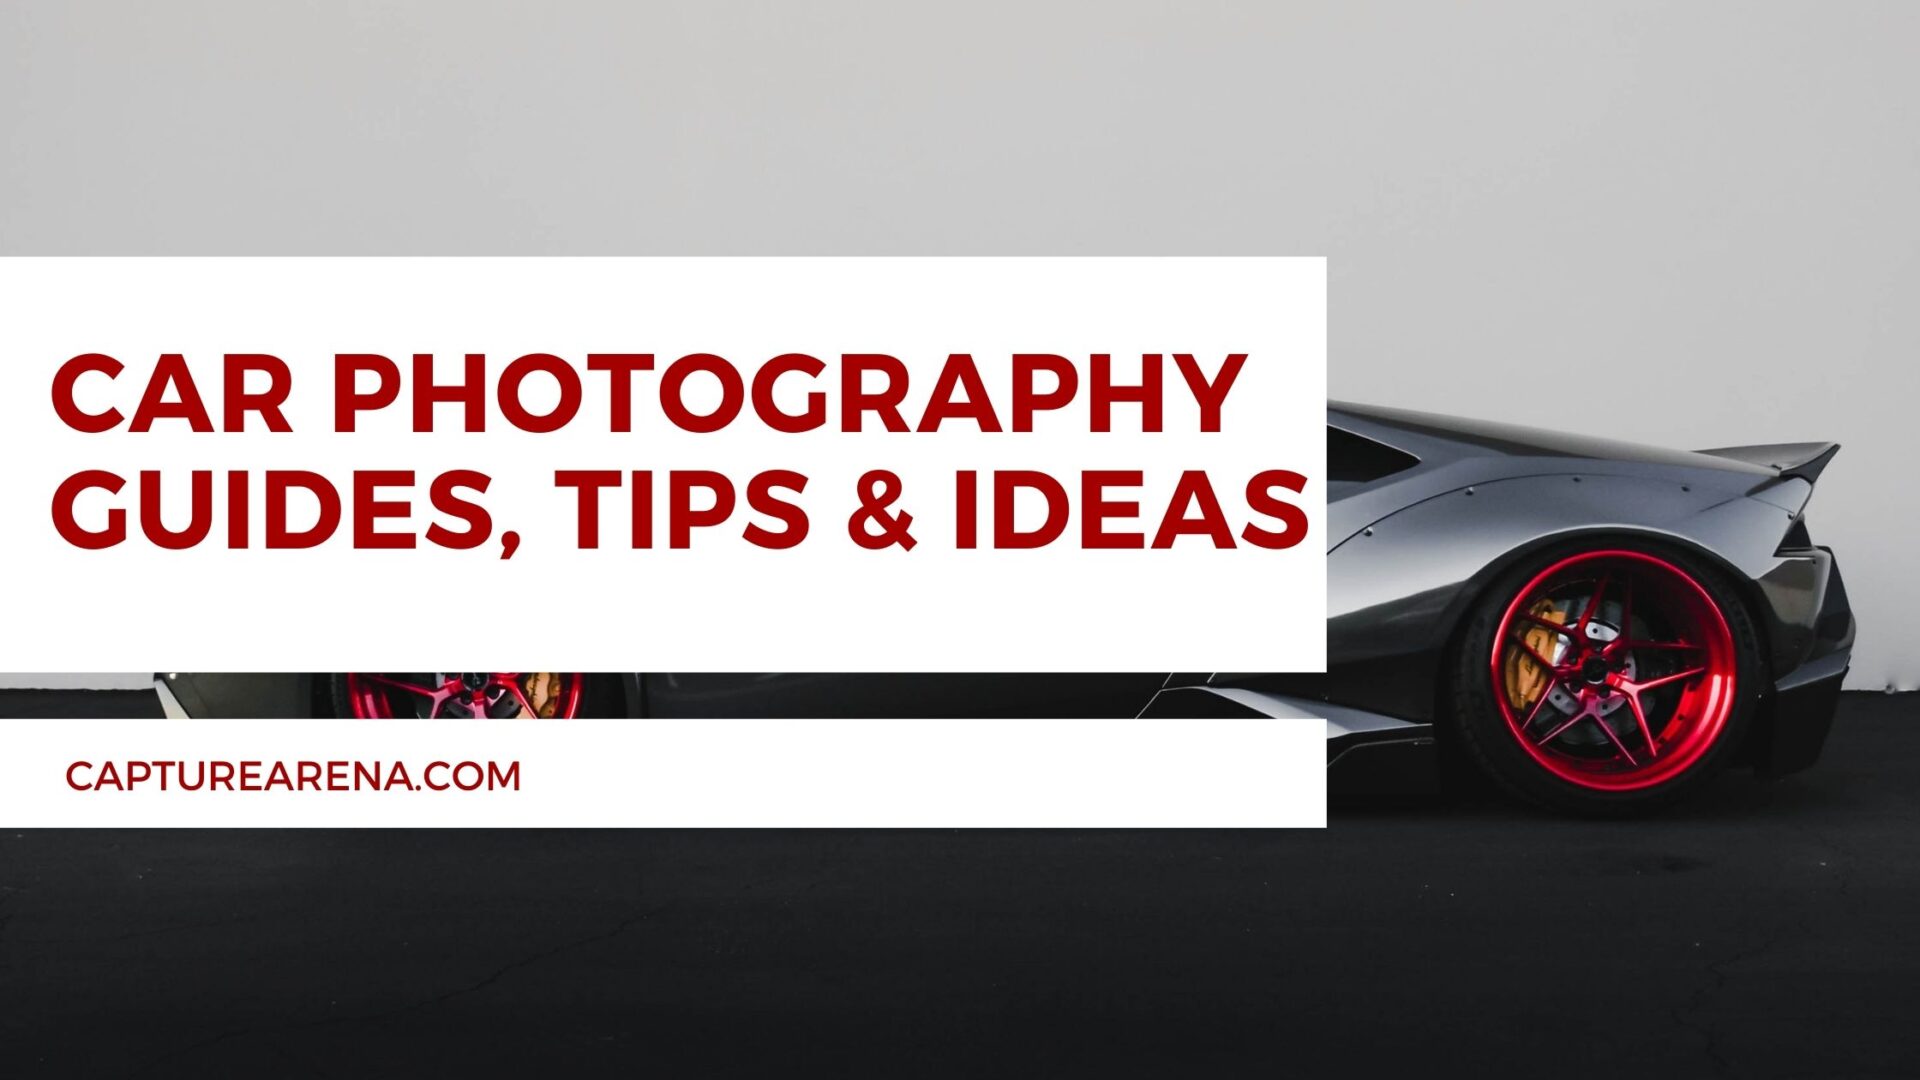 Car Photography Guide, Tips, and Ideas